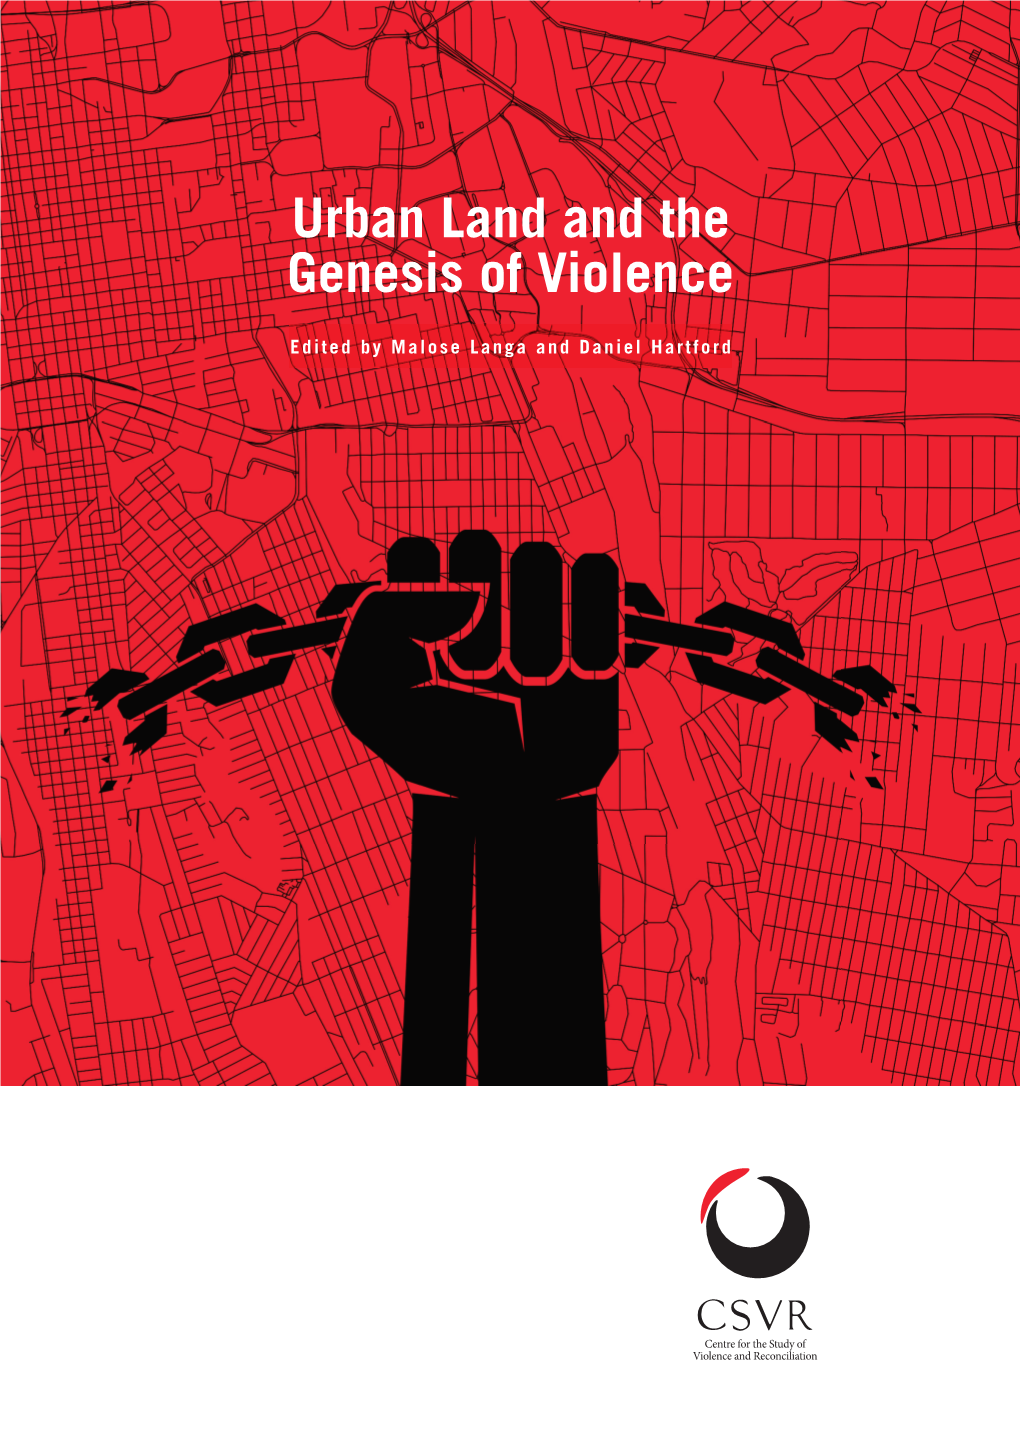 Urban Land and the Genesis of Violence